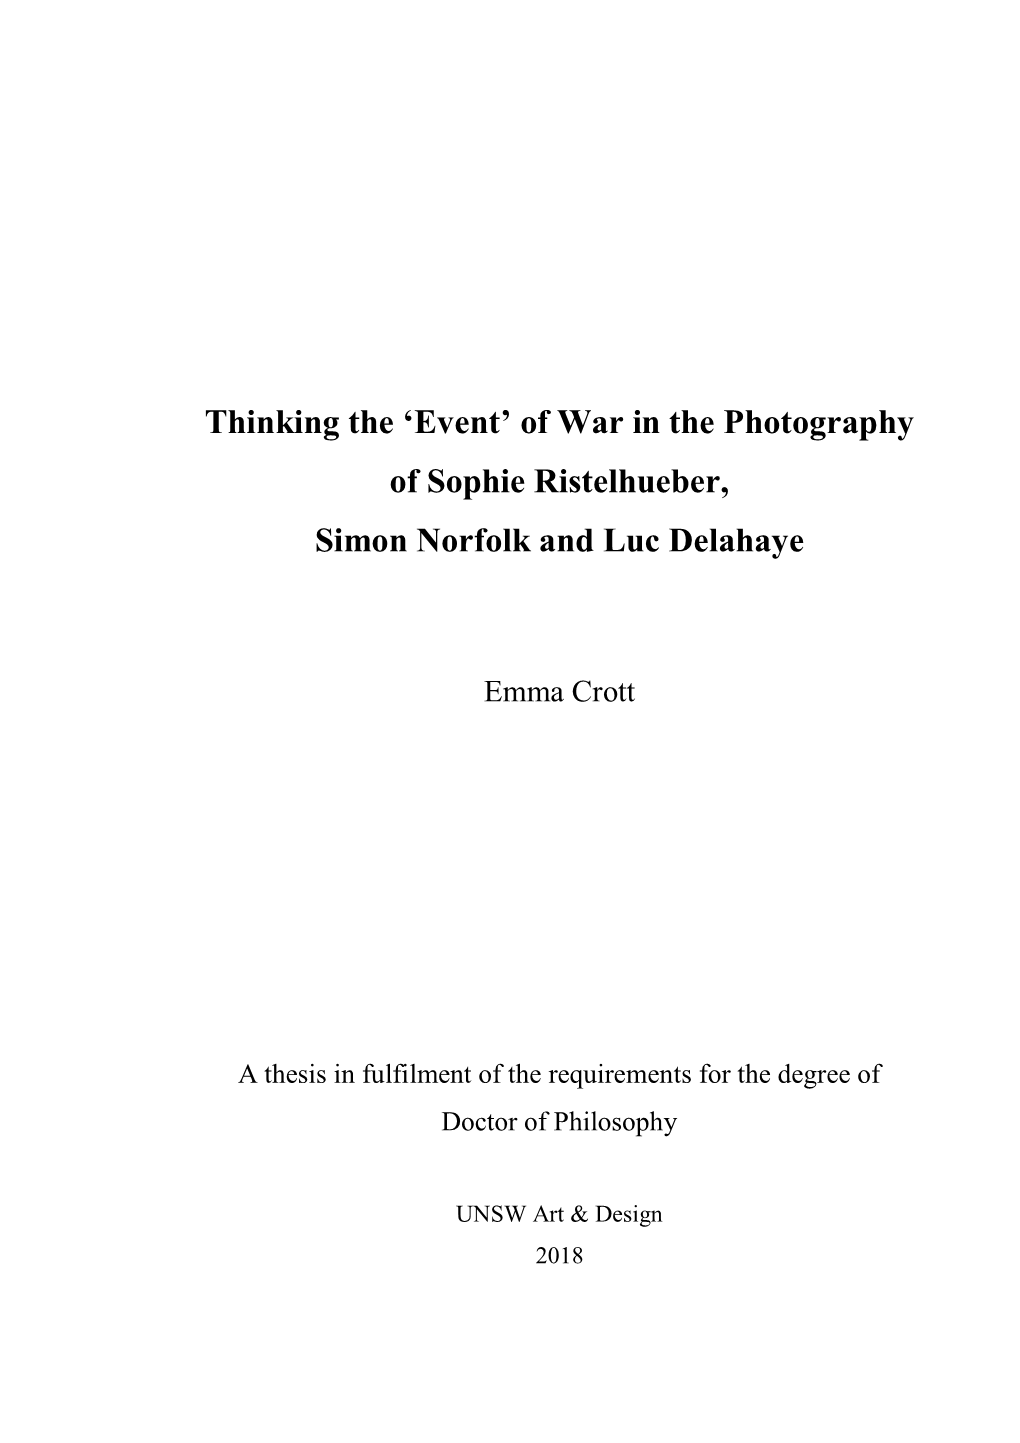 Of War in the Photography of Sophie Ristelhueber, Simon Norfolk and Luc Delahaye